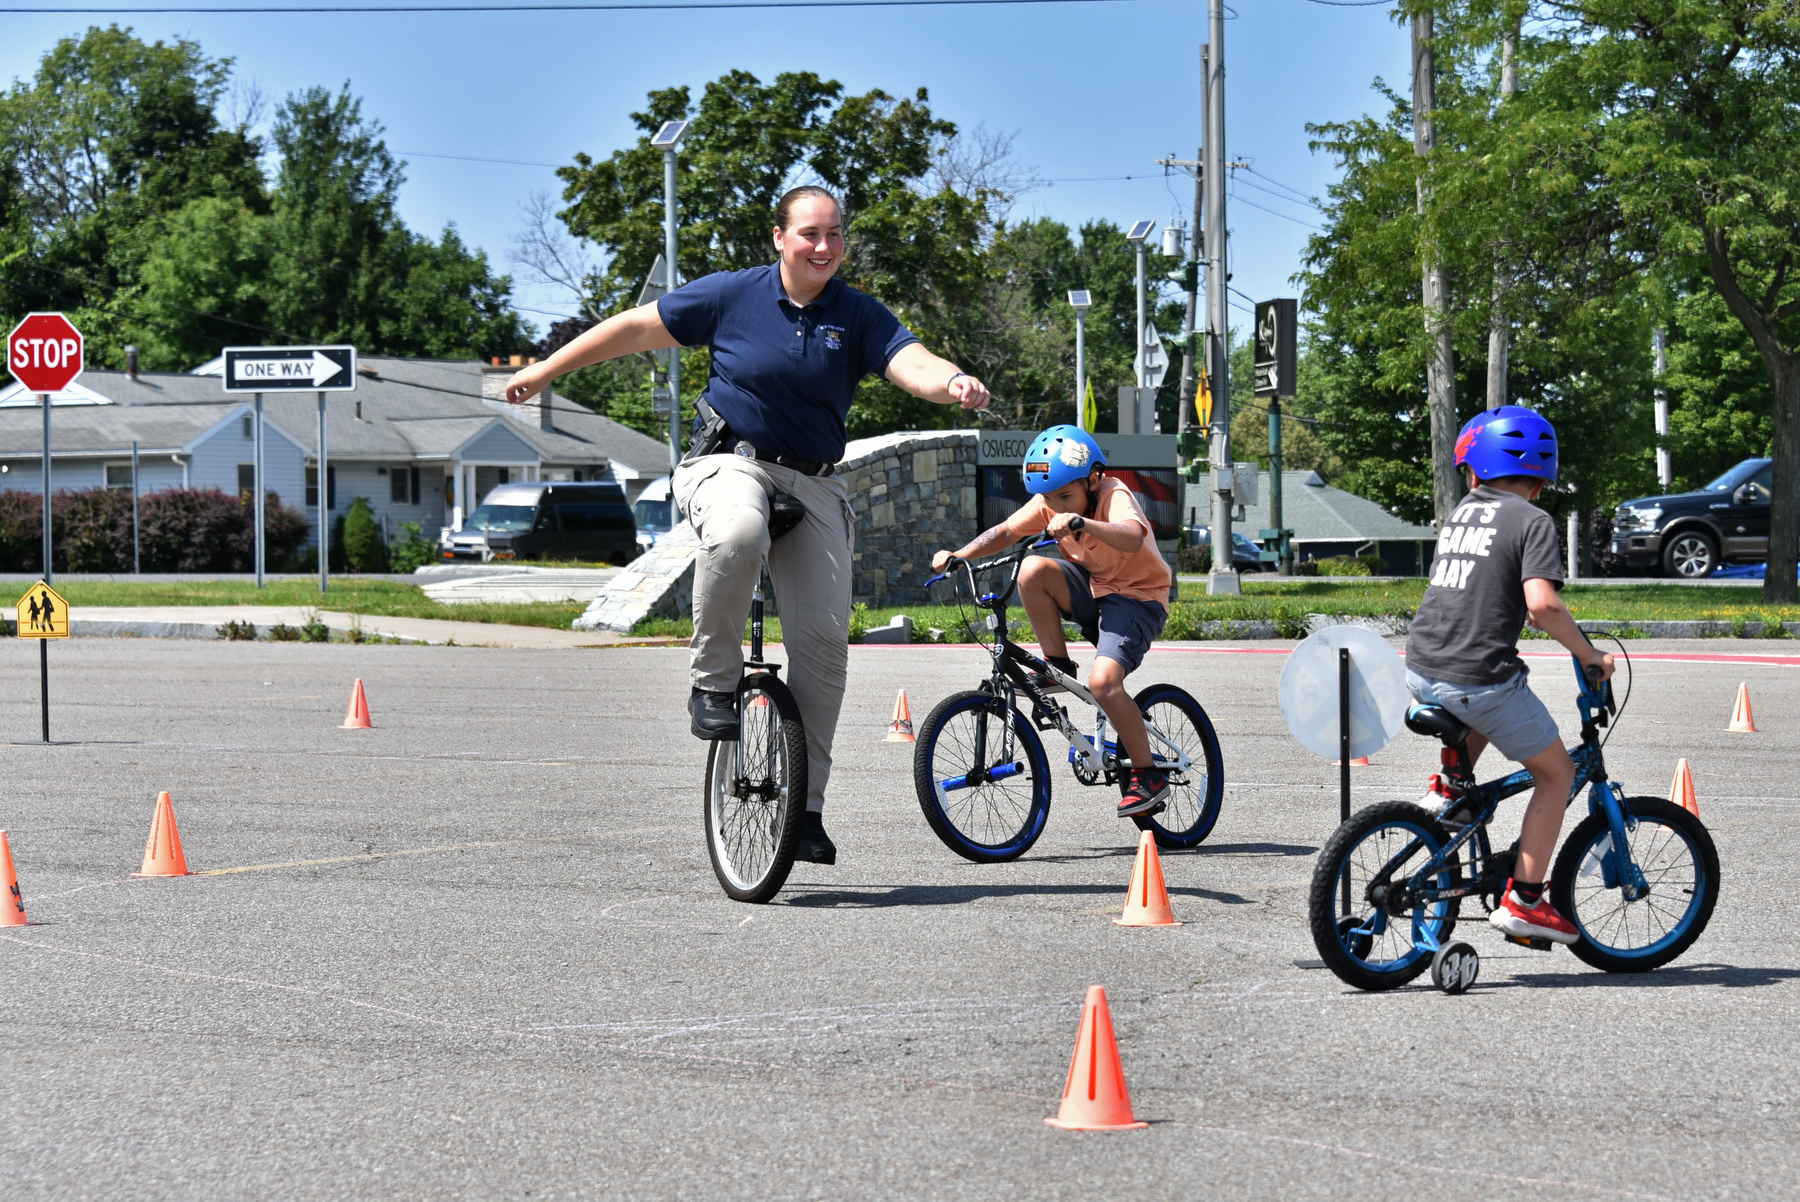 University Police Officer Tina Bedard skillfully rides a unicycle along with the kids on their bikes along the course during the Aug. 2 community bike rodeo.